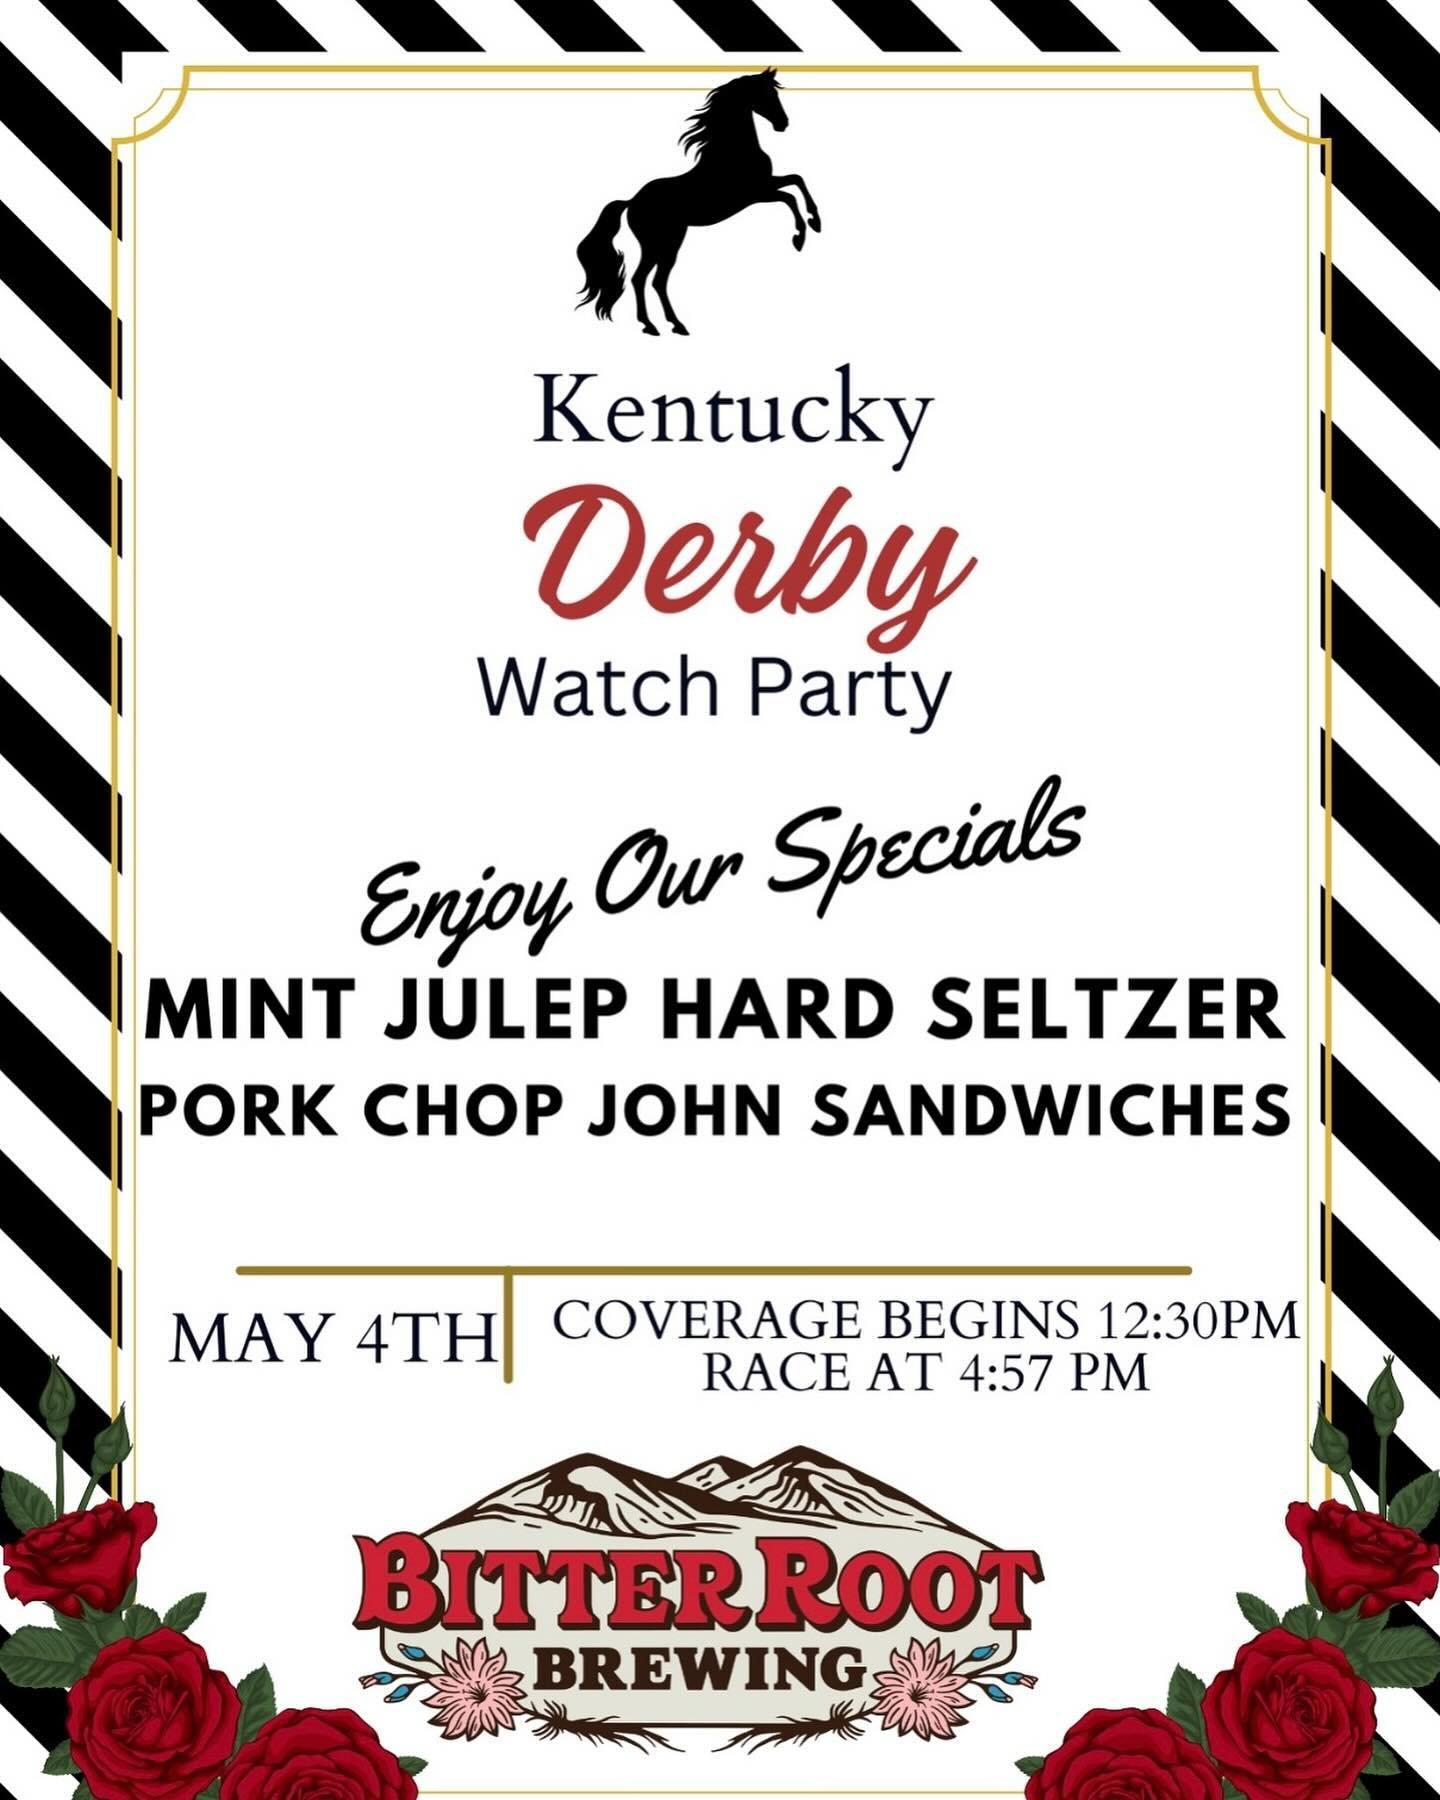 Throw on your fancy hats and come on down for the races! We&rsquo;ll have the Kentucky Derby on, along with food specials and a Mint Julep Hard Seltzer!
.
.
.
#derbyday #kentuckyderby #offtotheraces #mintjulep #hamtownsfinest #drinklocalbeer #porkcho